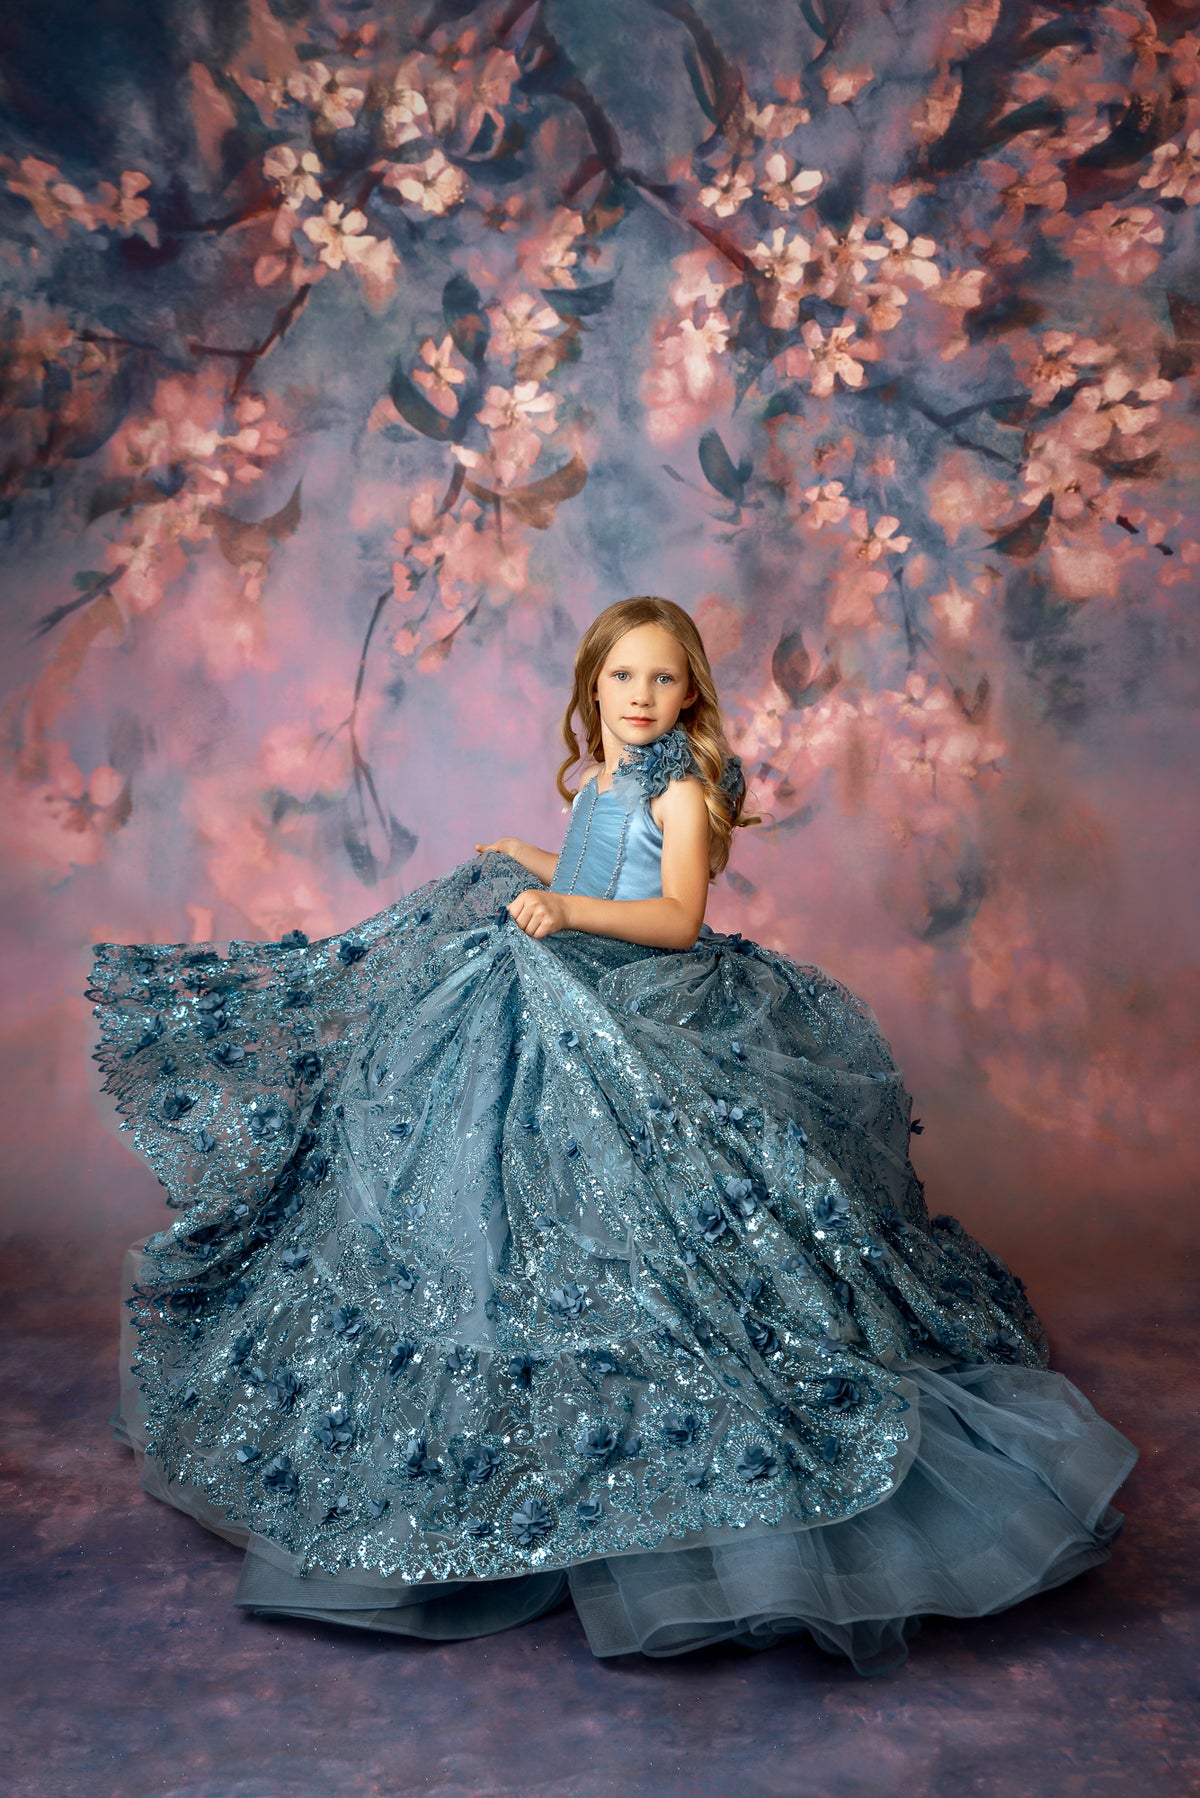 Often spoken Inclined Duchess rental dresses for photography sessions: "Sadie" in Slate Blue Floor length  gown (7 year- petite 8 year) BENTLEY AND LACE- GOWNS FOR PHOTOGRAPHY AND  EVENTS. | Bentley and Lace